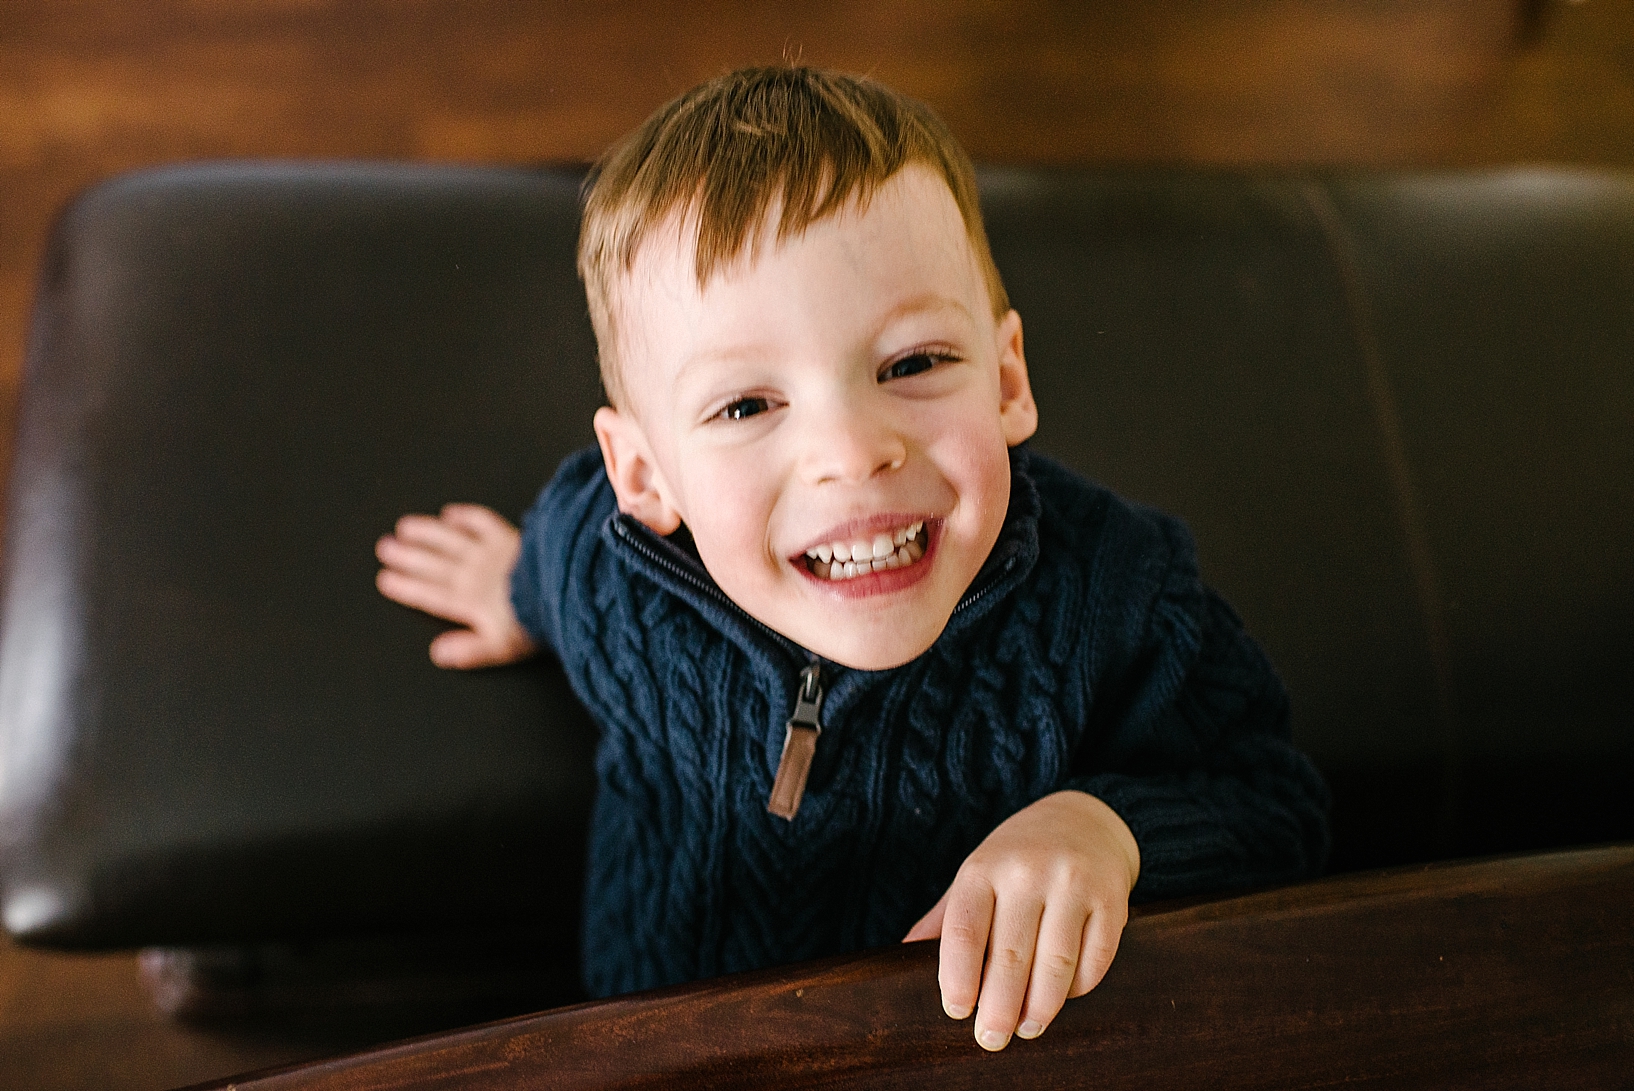 young boy wearing blue sweater smiling up at camera in bedroom